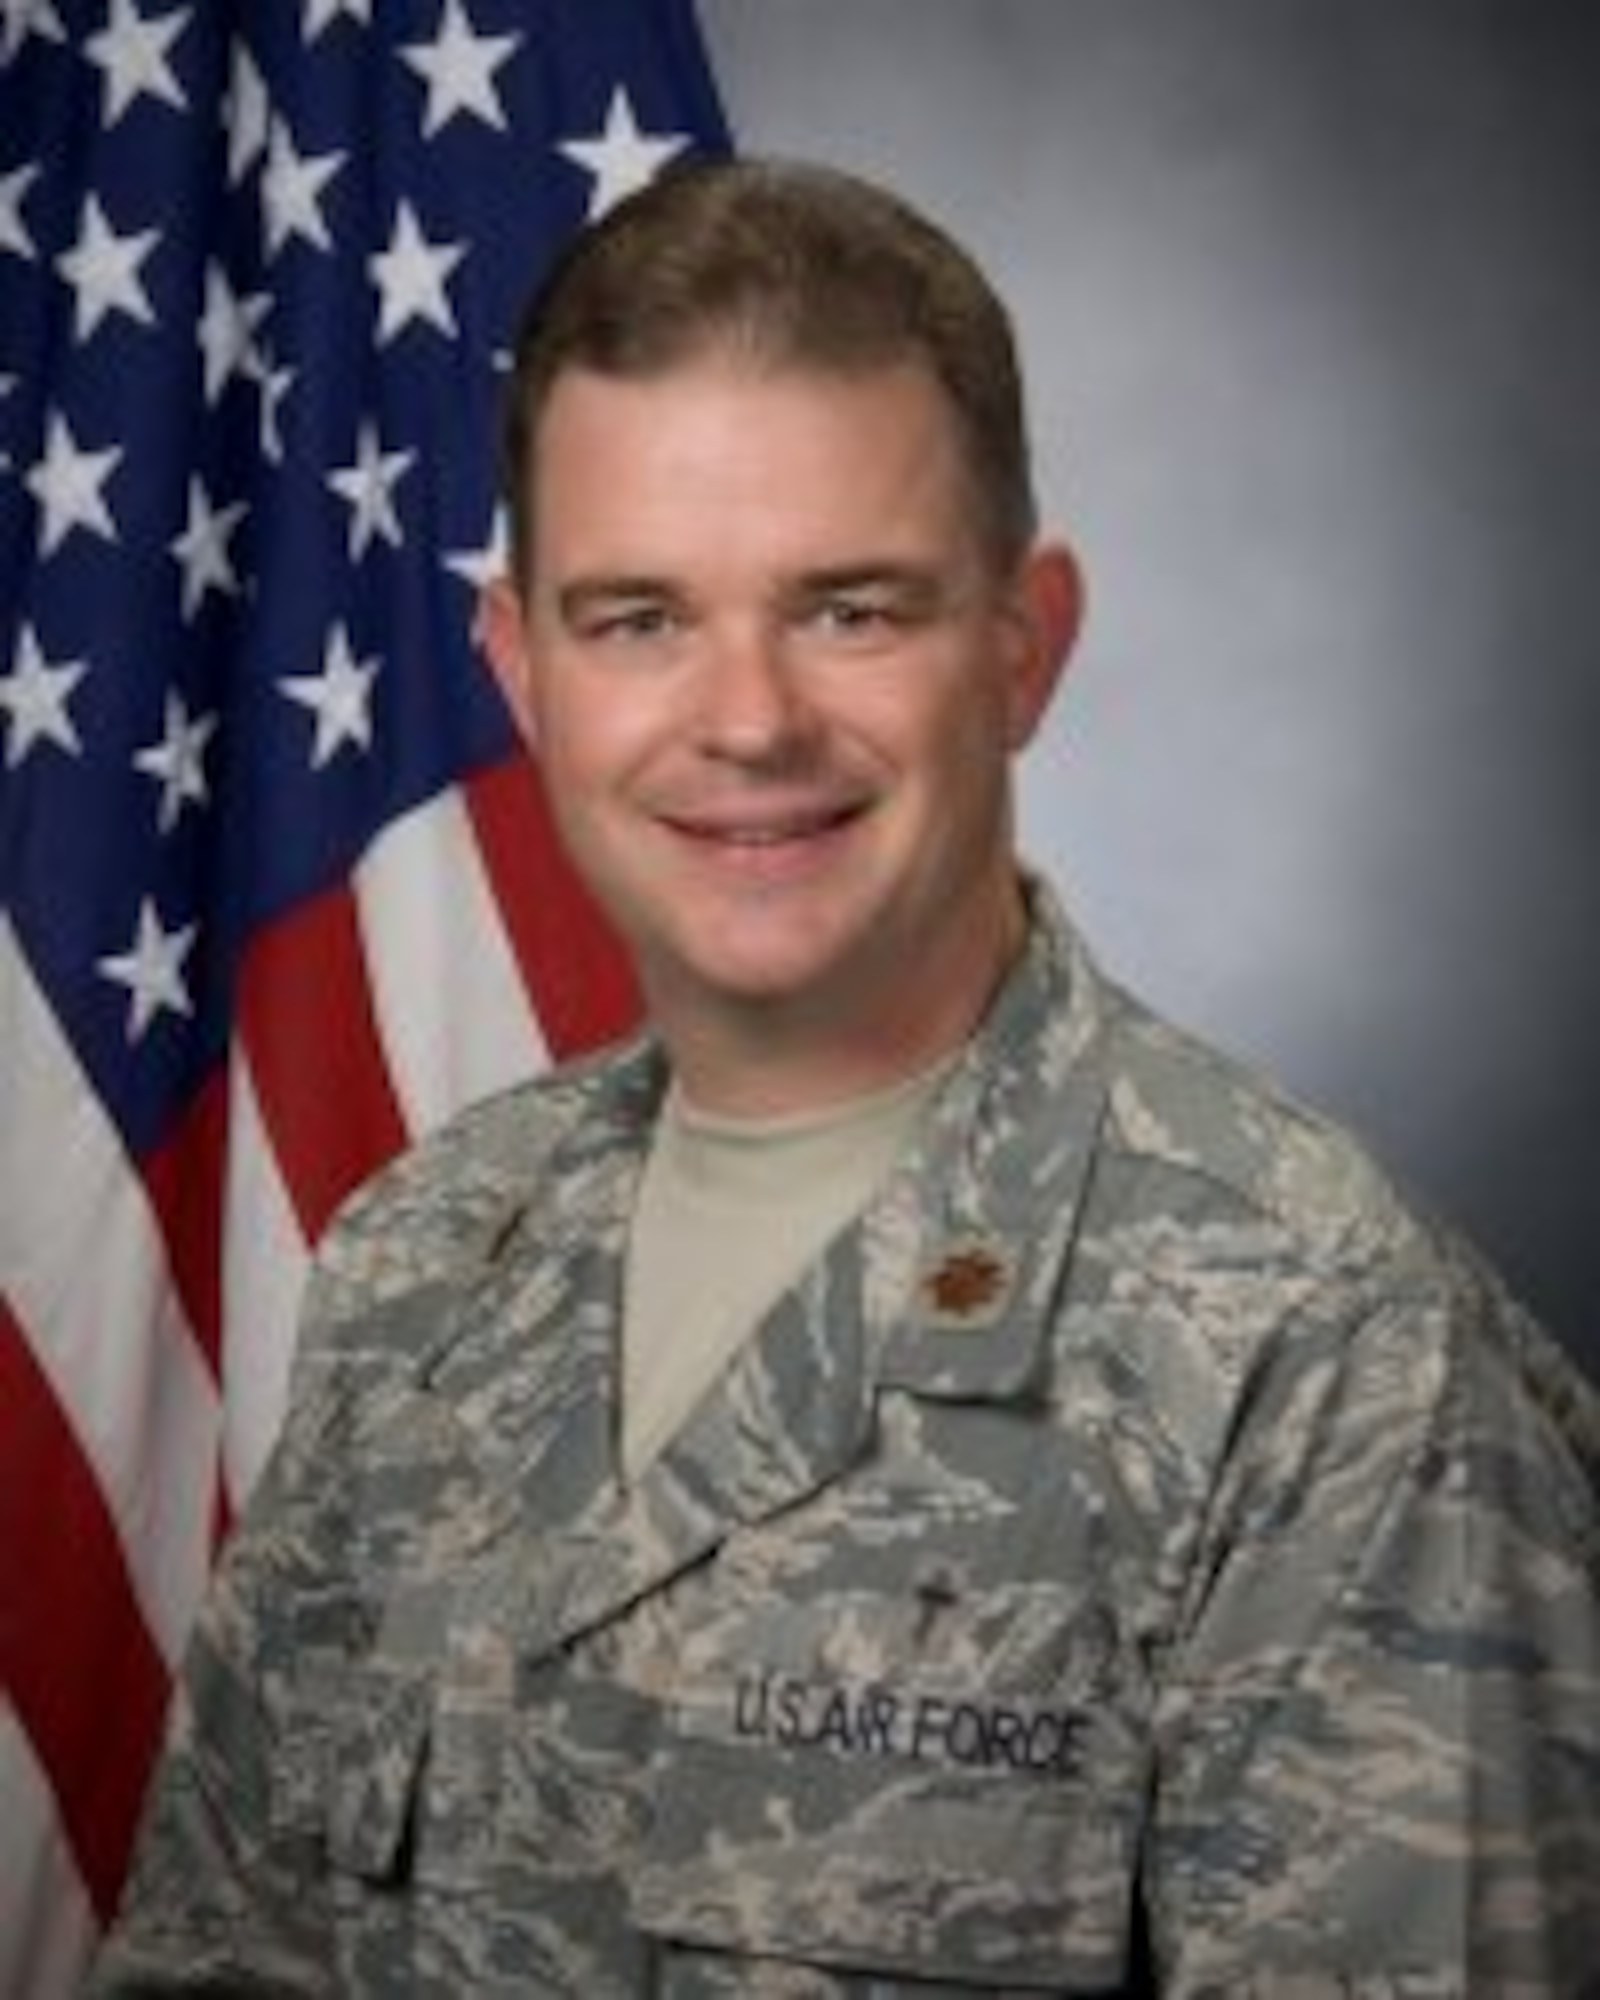 The new wing chaplain for the 908th Airlift Wing, Maj. David Dersch, is a familar face around the unit. He's been a member for the past four years.